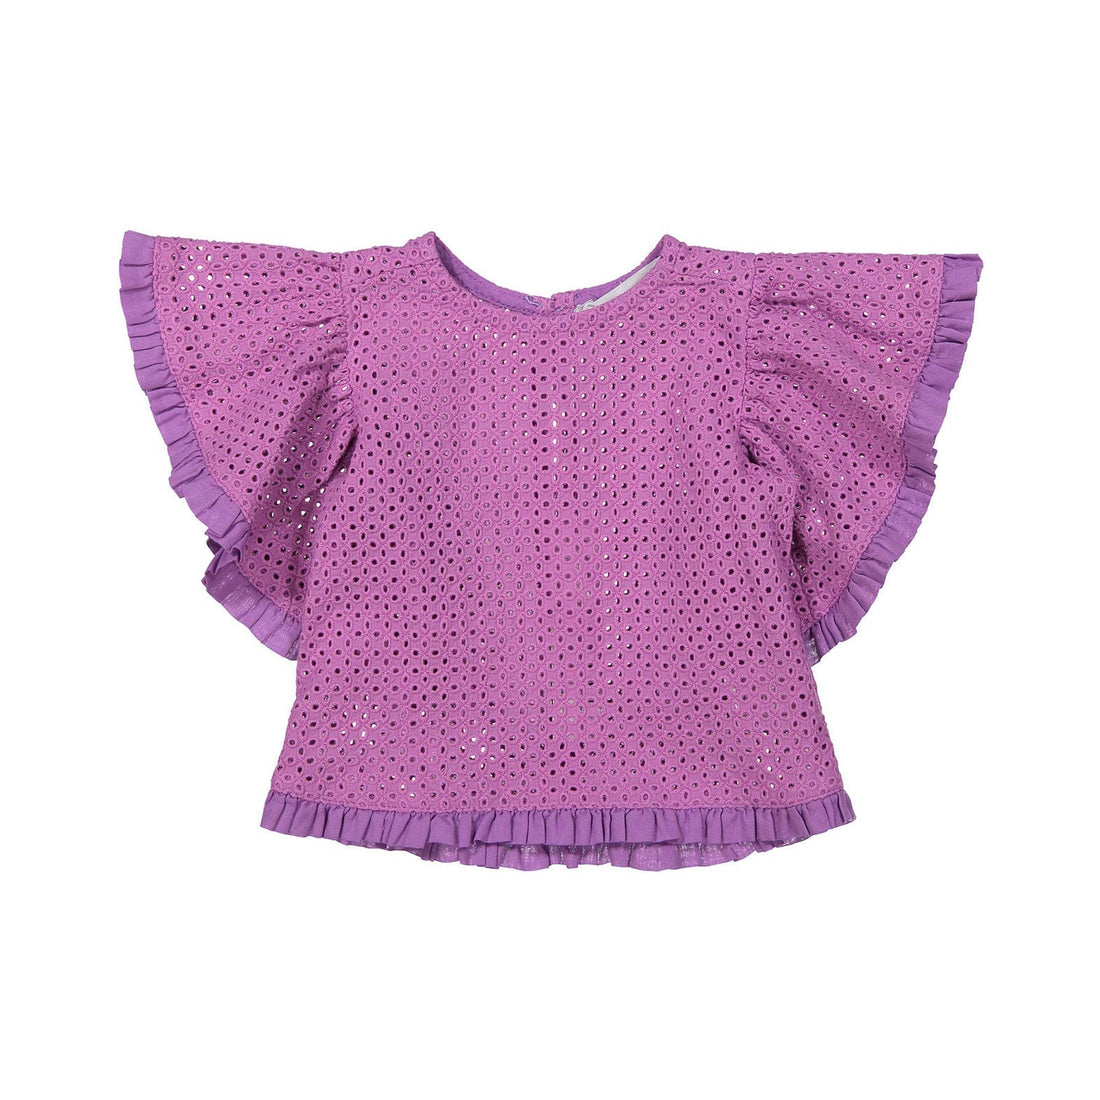 You and Me blouses You and Me Mauve Eyelet Flutter Blouse